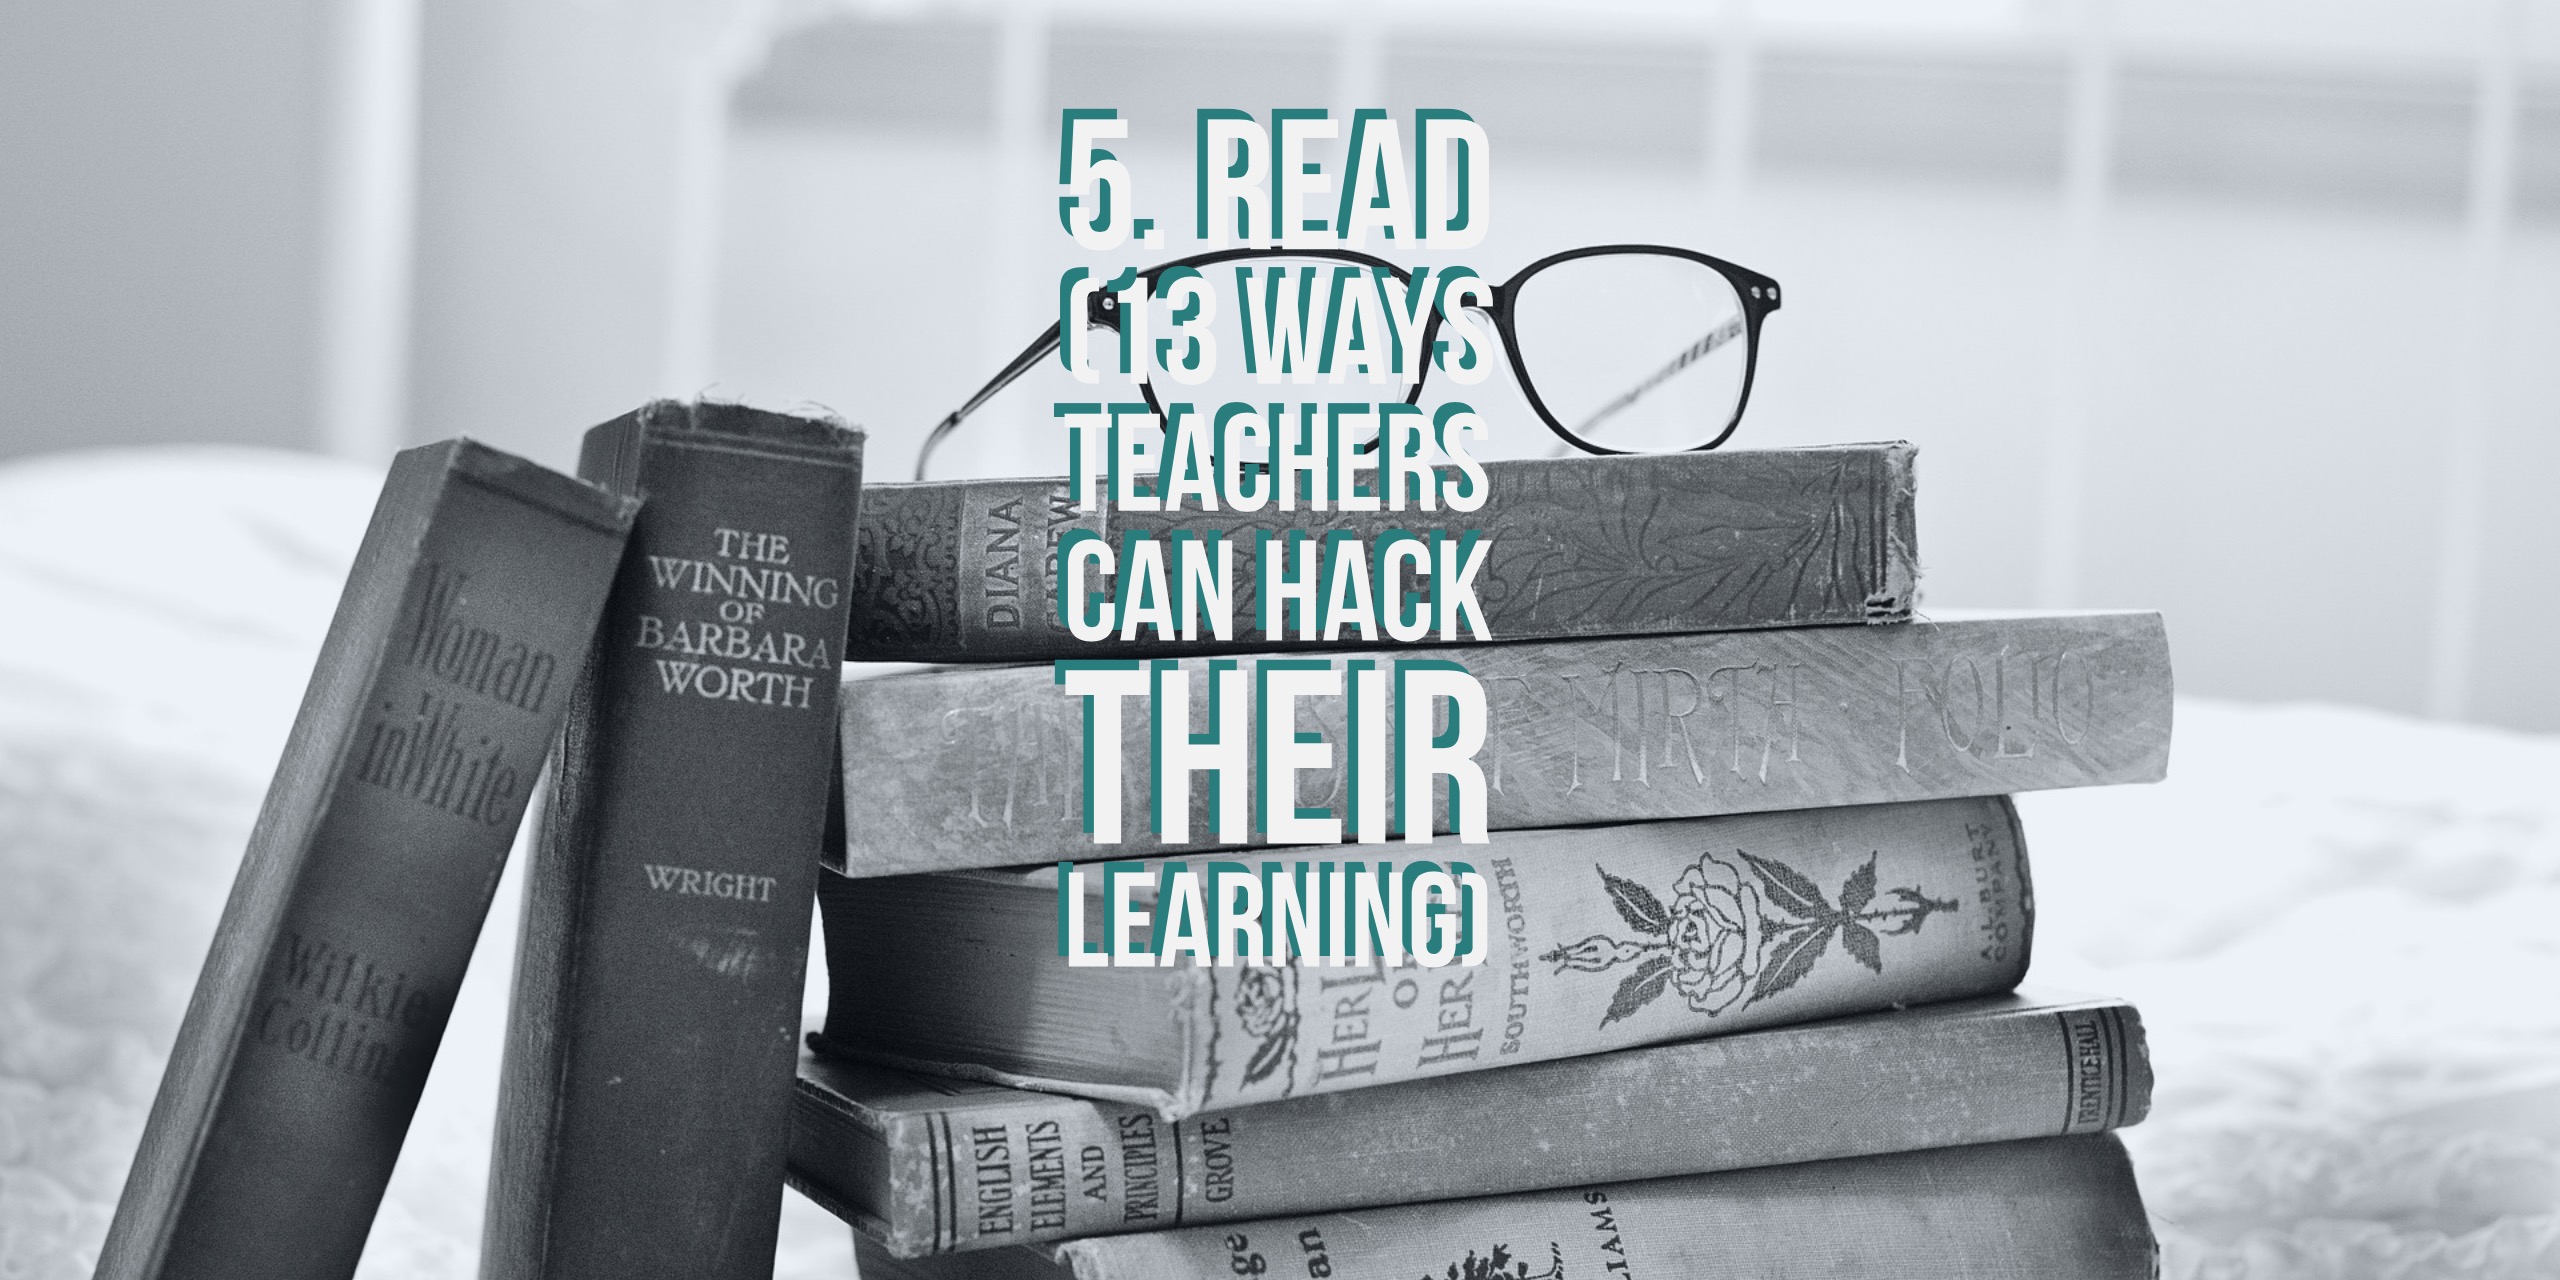 5. Read (13 Ways Teachers Can Hack Their Learning)